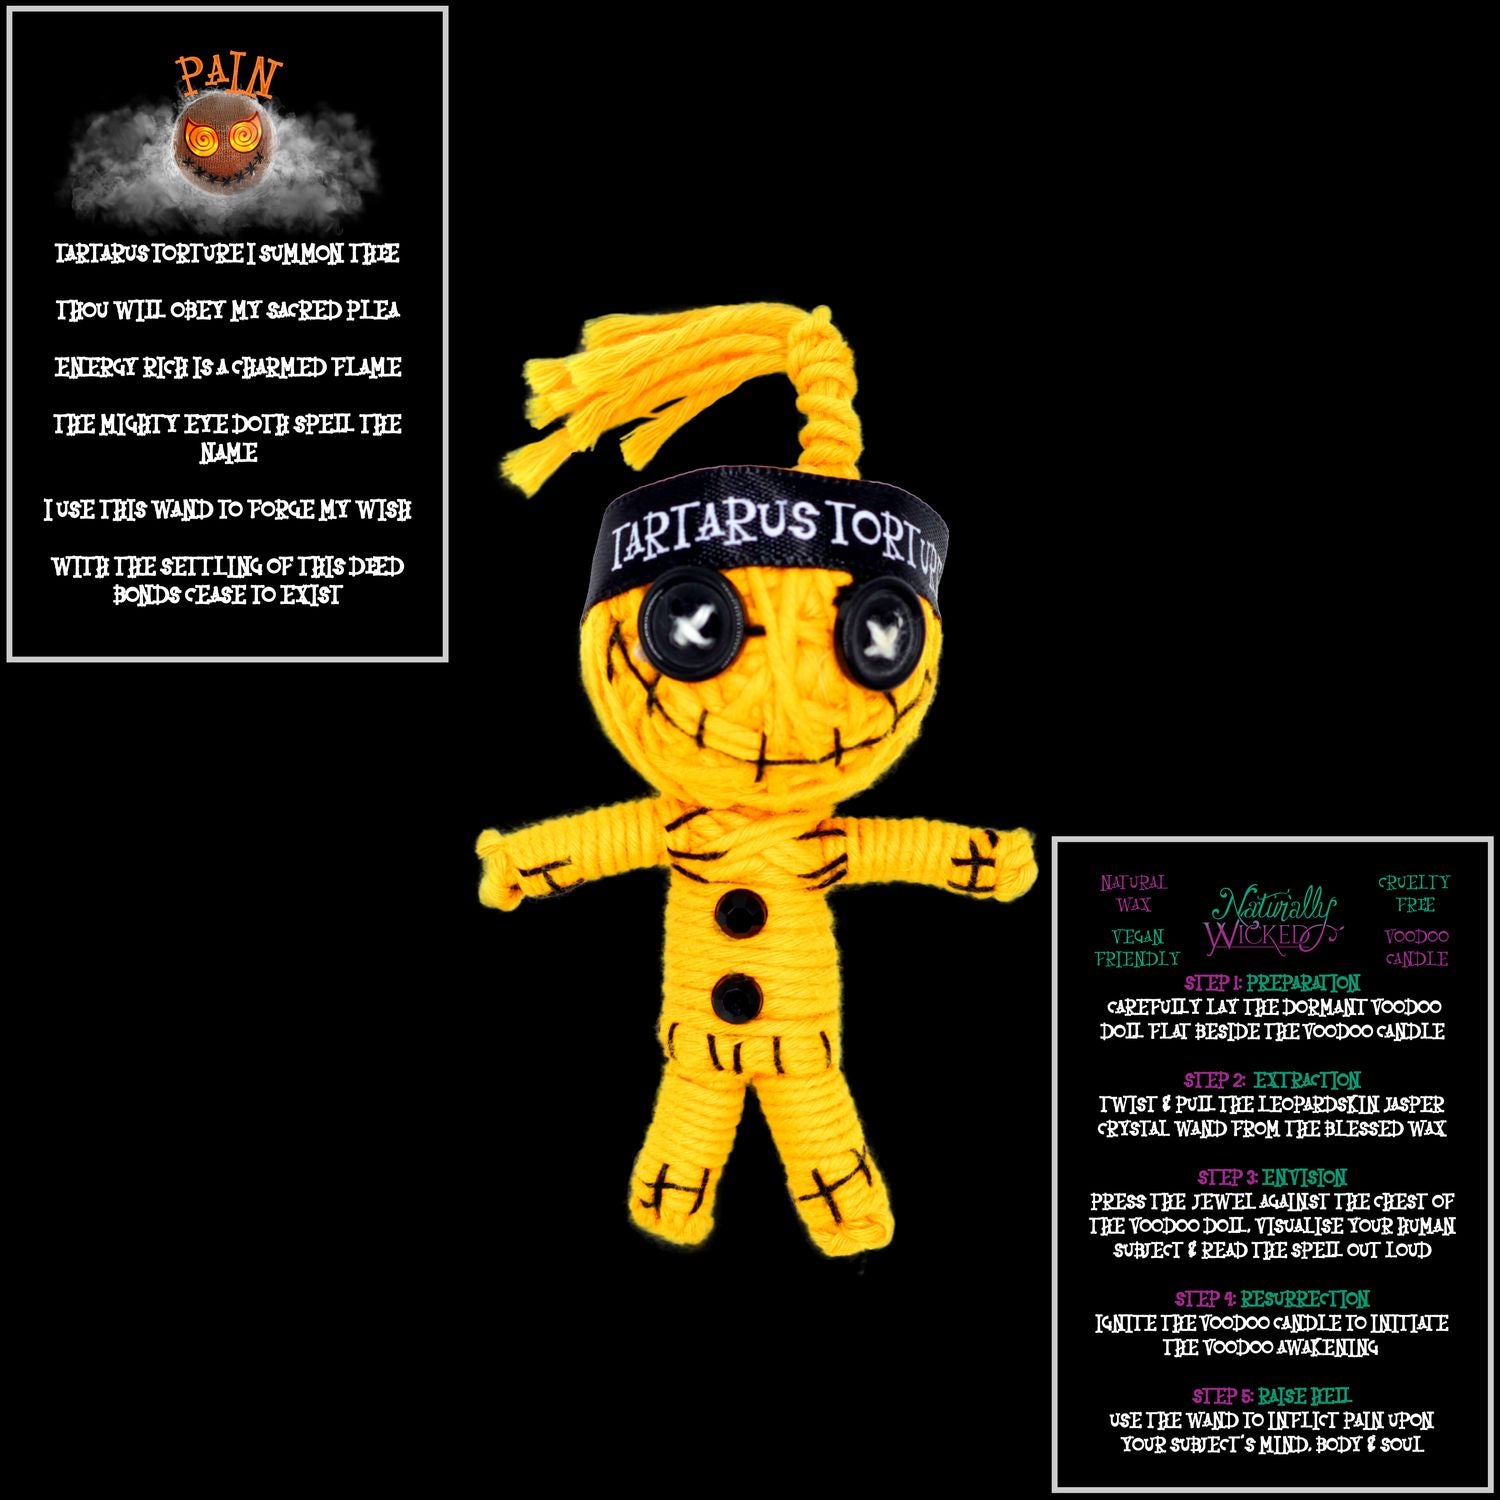 Naturally Wicked Orange Voodoo Doll Tartarus Torture Featured With Pain Spell Cards. The Perfect Gift For Inflicting Pain.